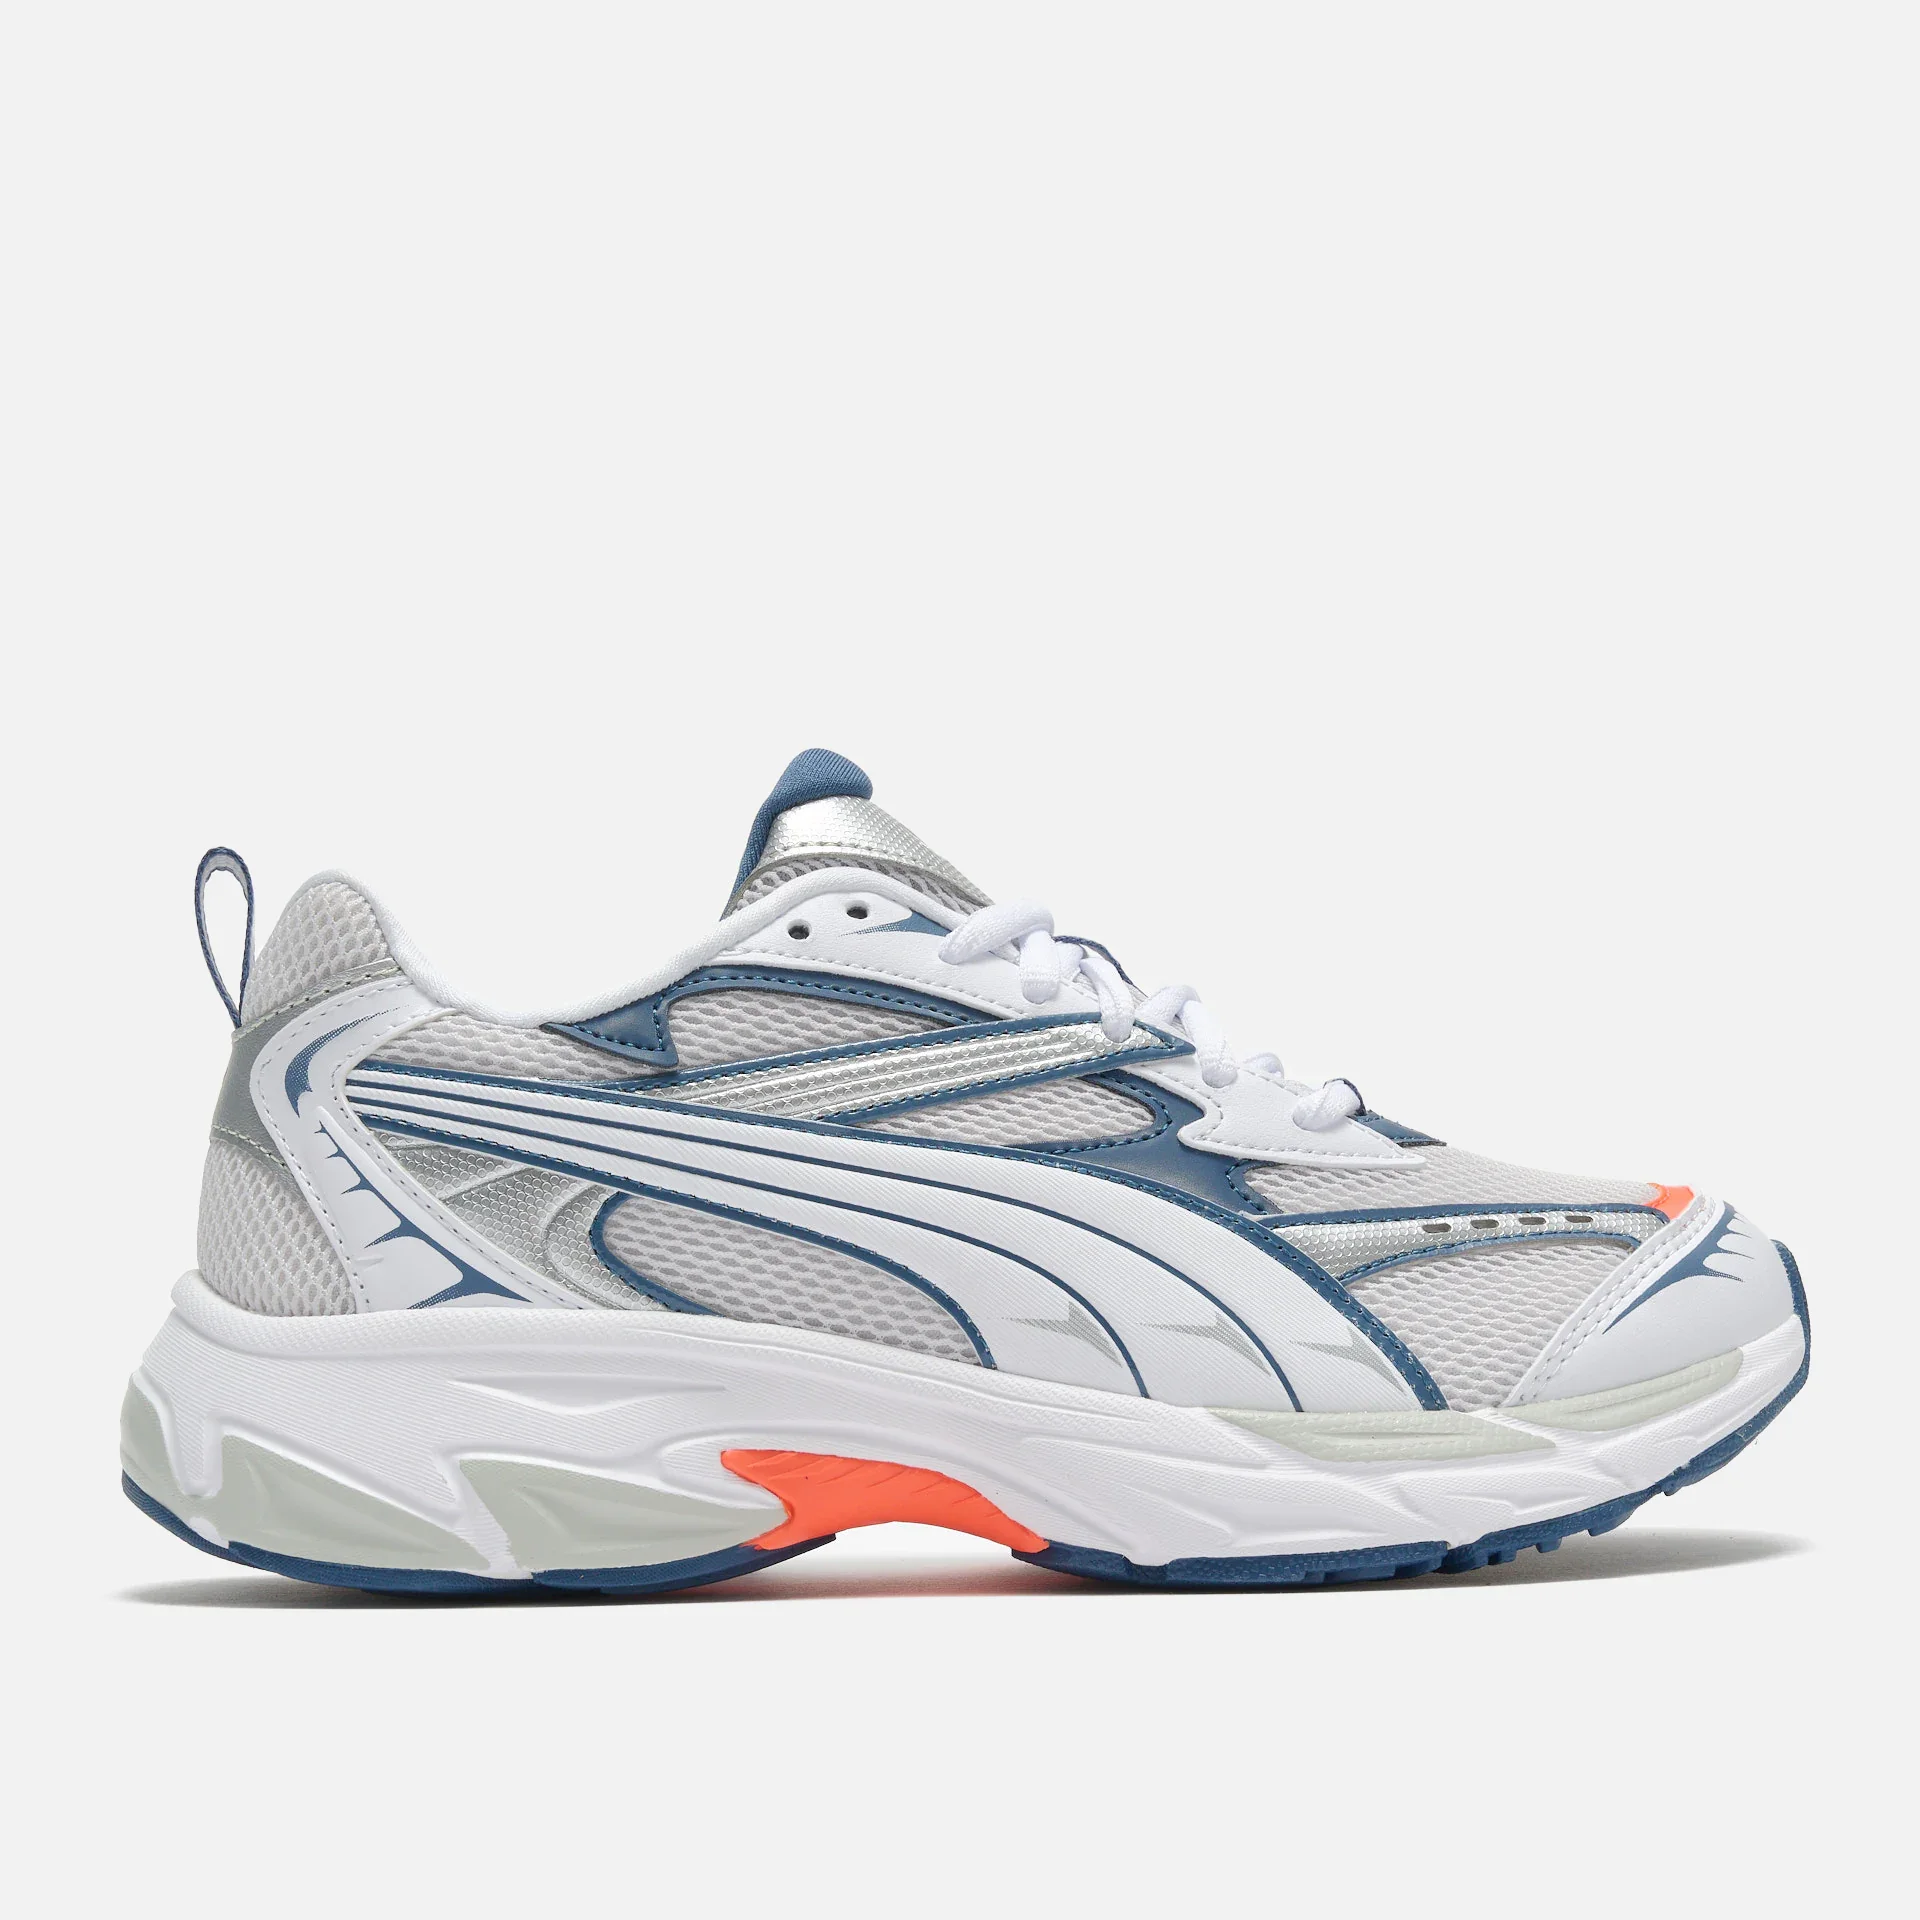 PUMA Morphic Feather Gray Inky Blue